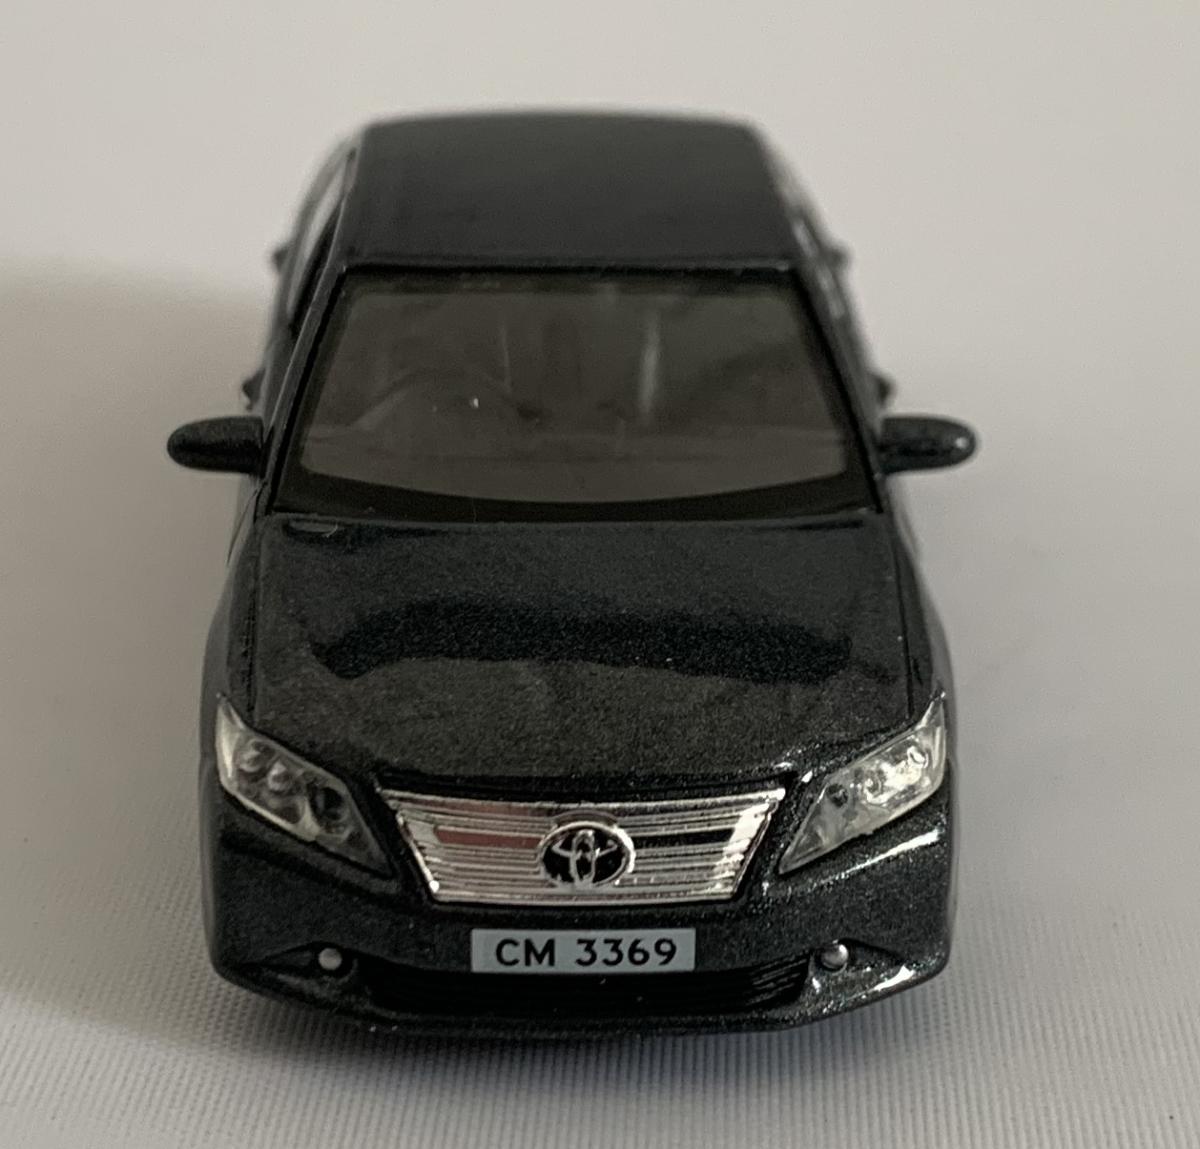 Toyota Camry 2011 in metallic grey 1:64 scale model from Tiny